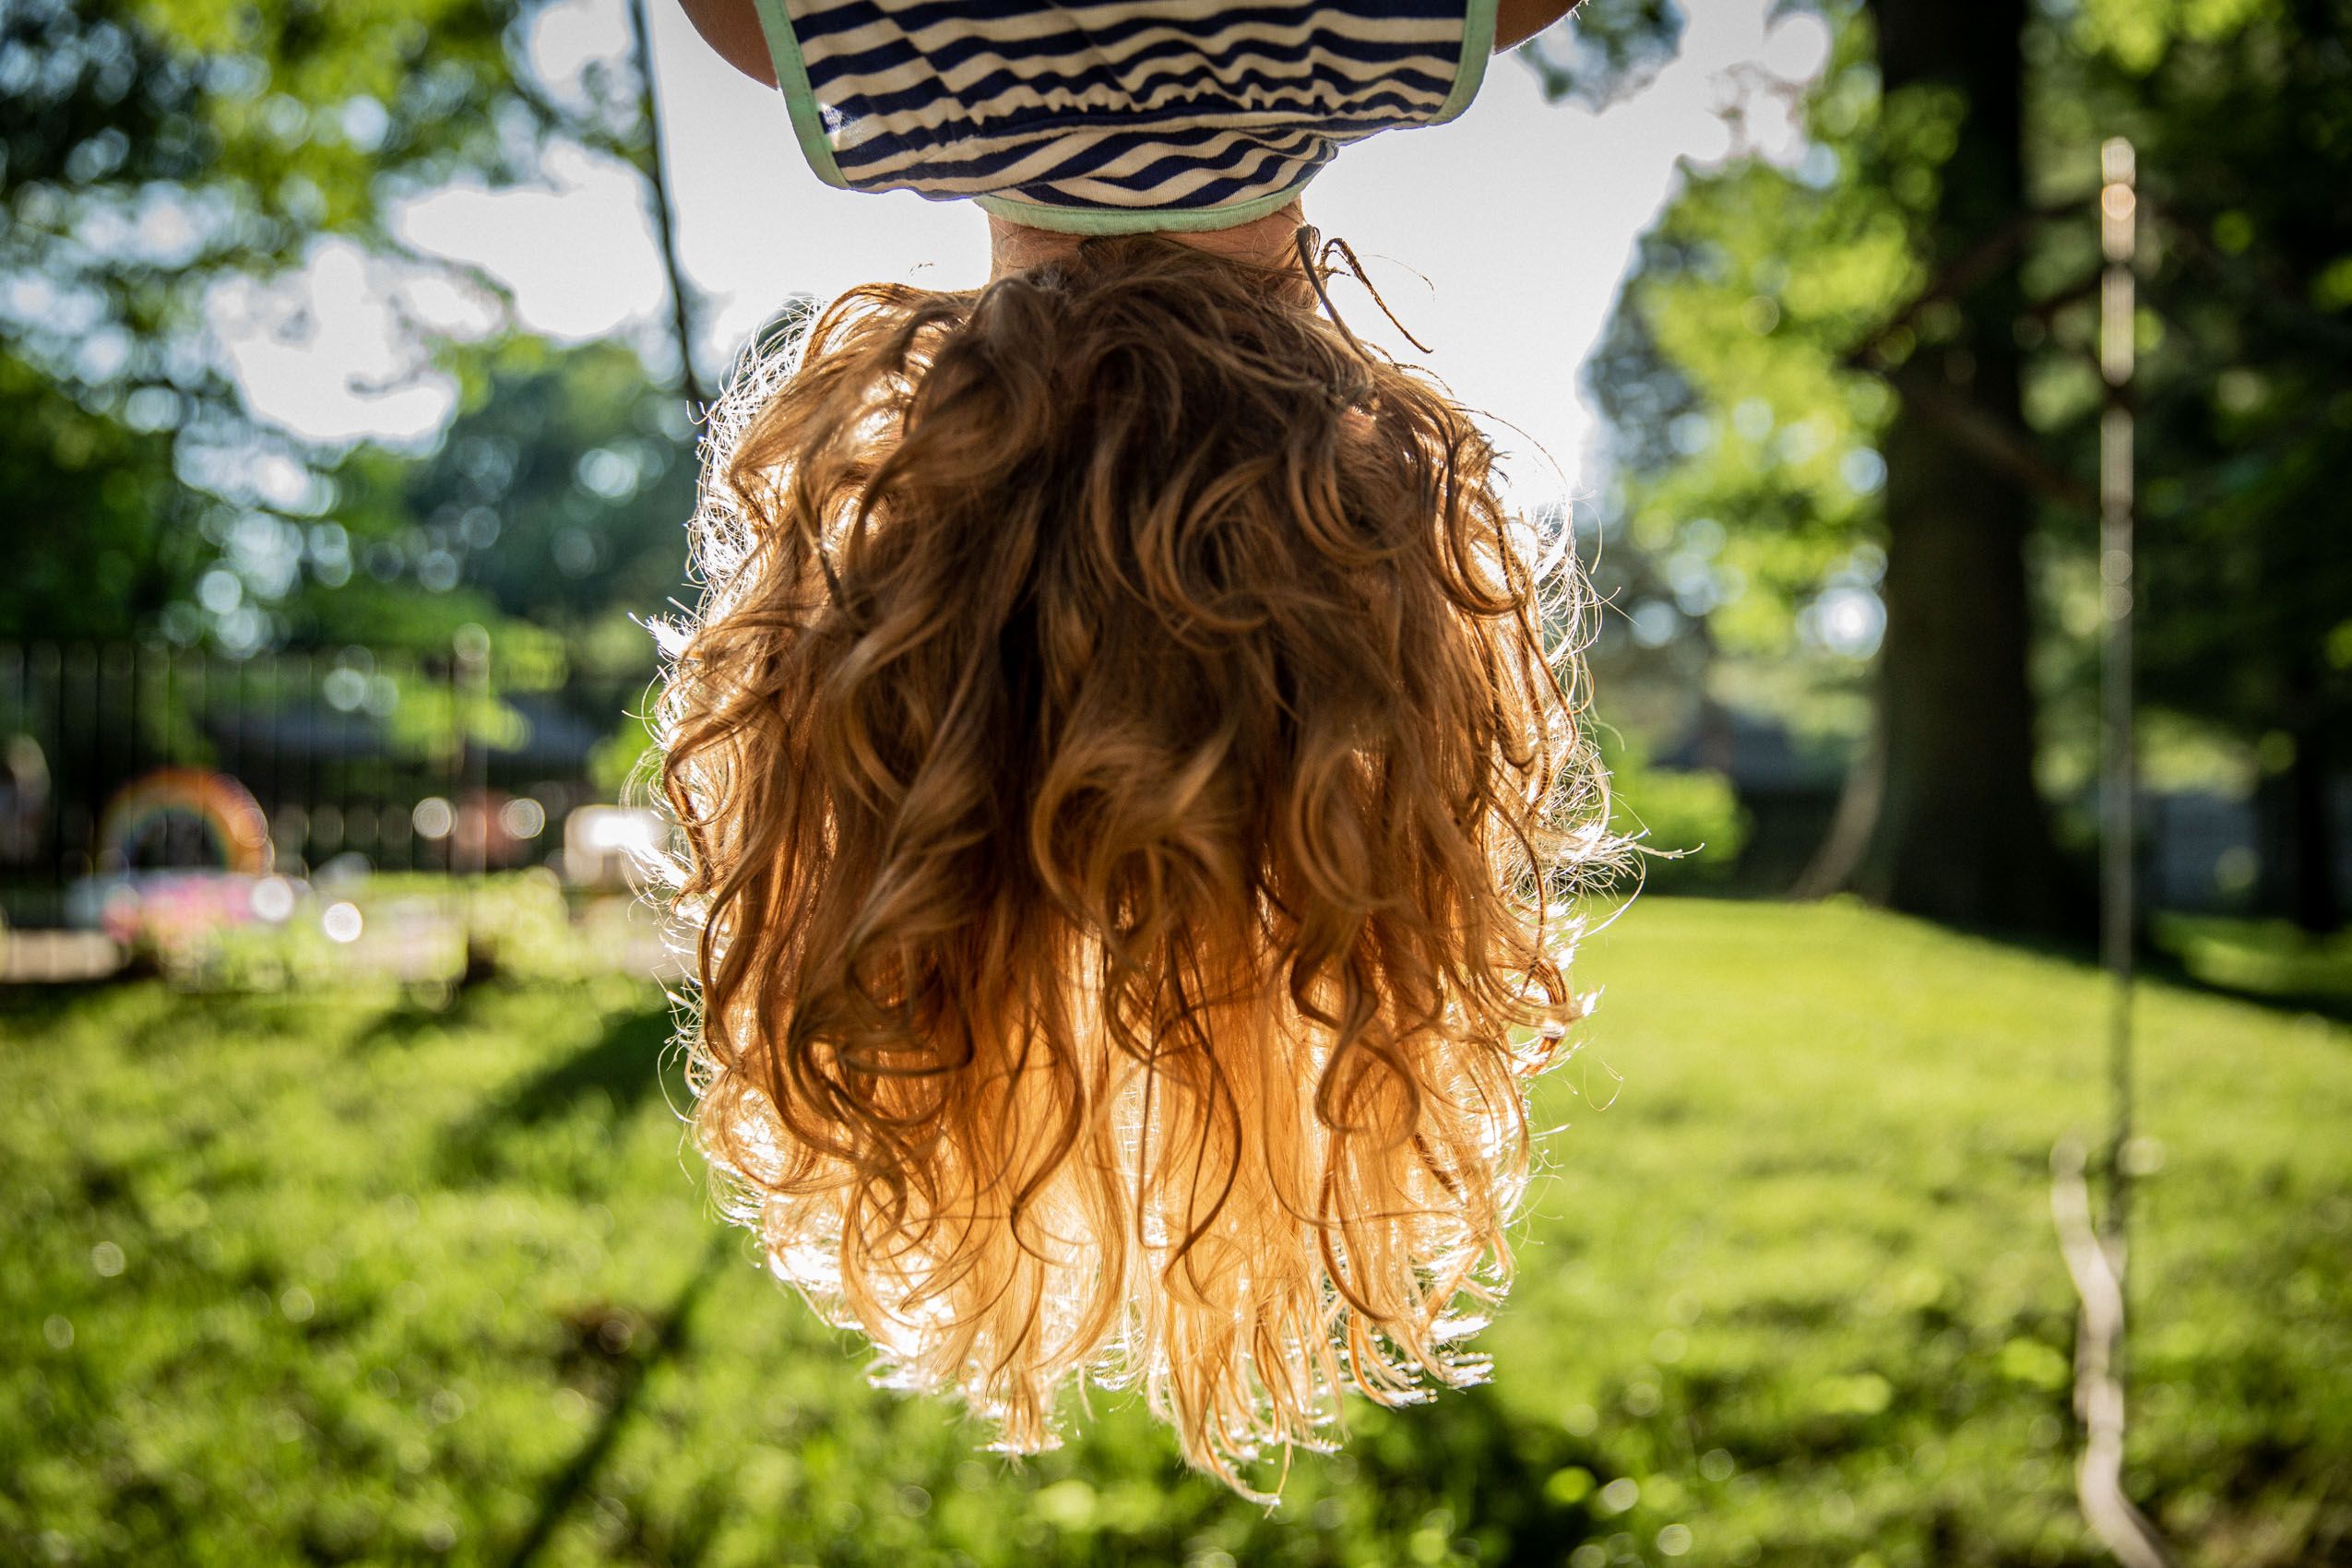 Young Girl Upside Down on Playground